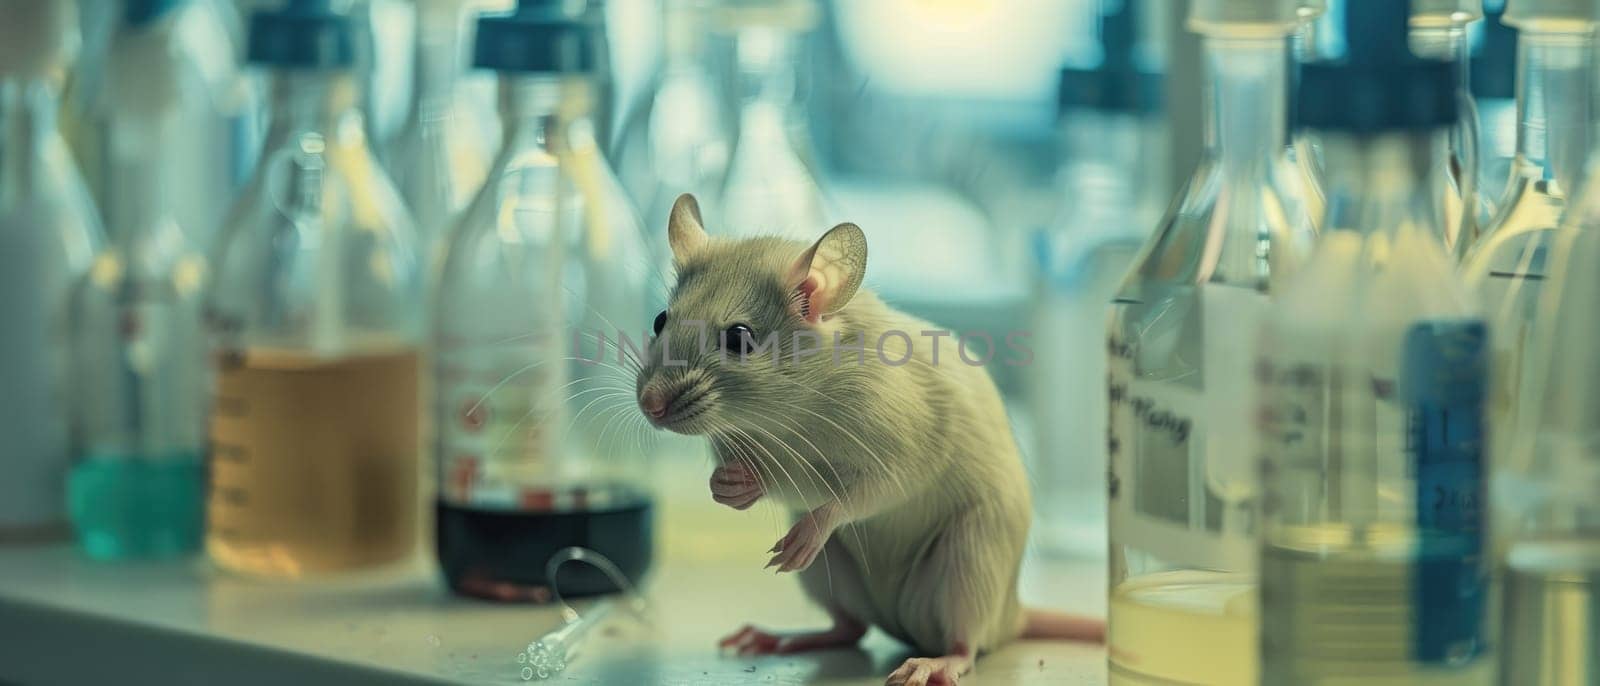 A small white mouse is sitting on a counter next to several bottles by AI generated image.